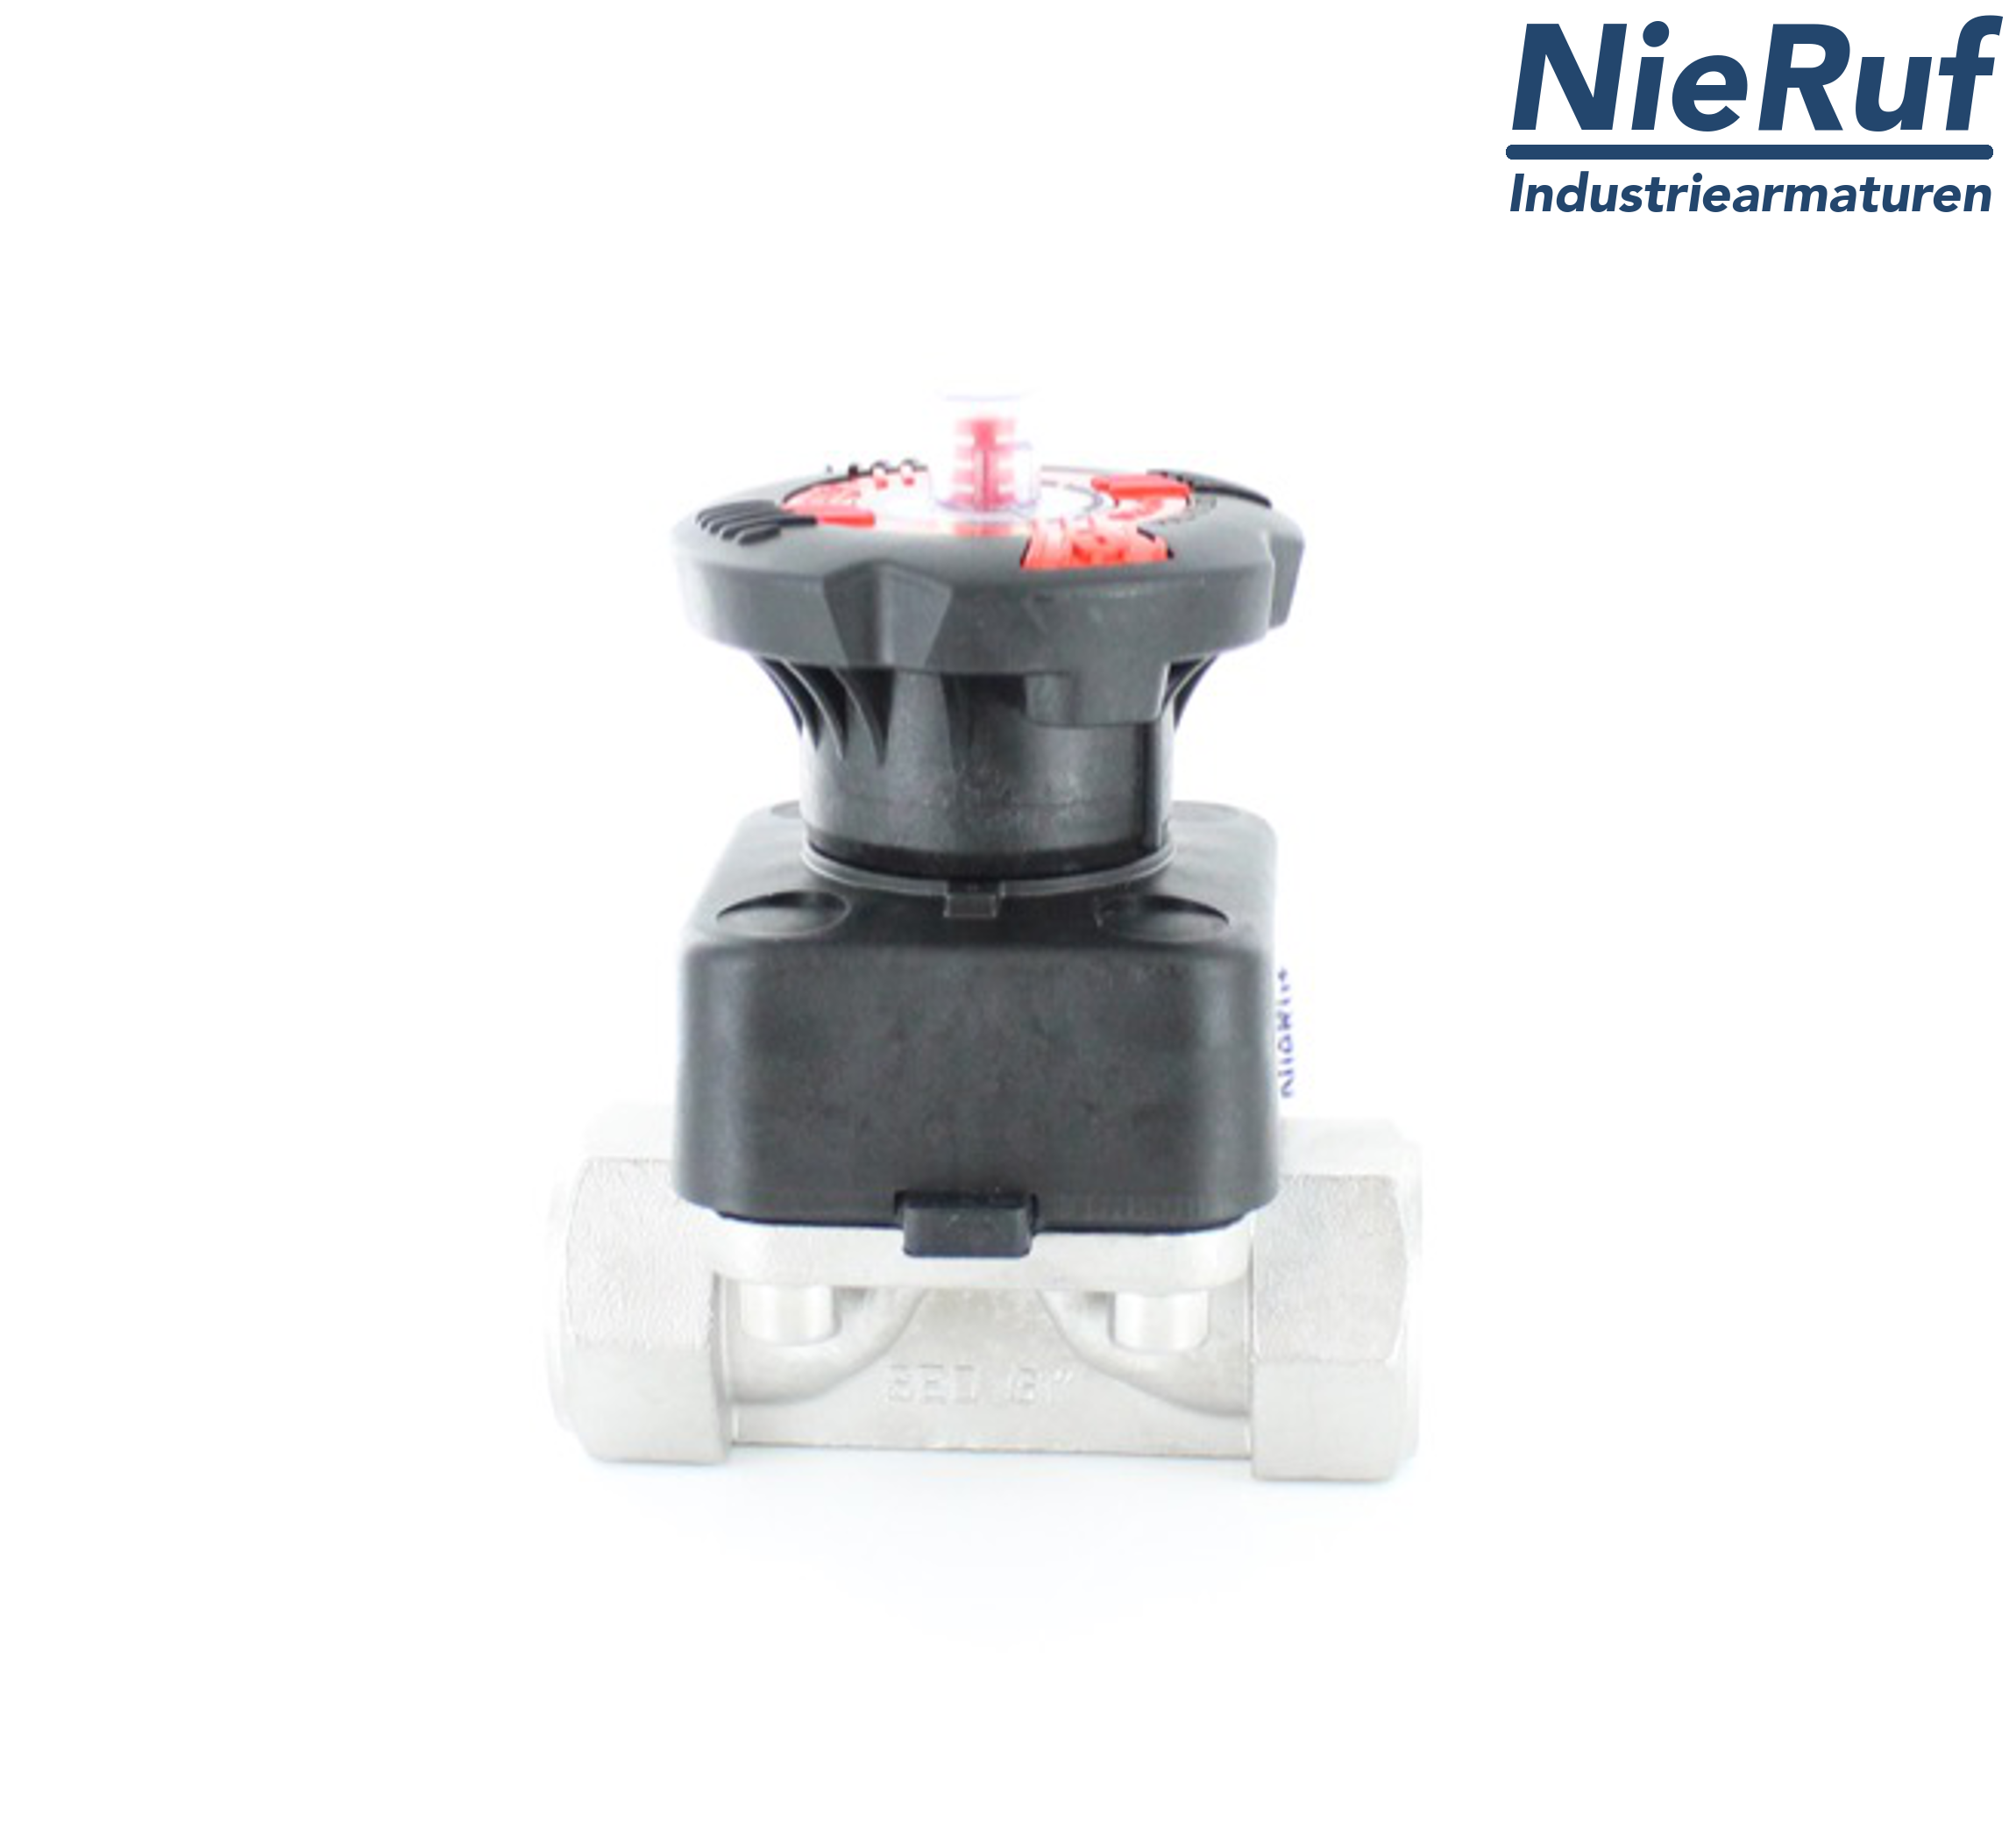 stainless steel-diaphragm valve 1 Inch membrane PTFE/EPDM two-piece female thread BSP